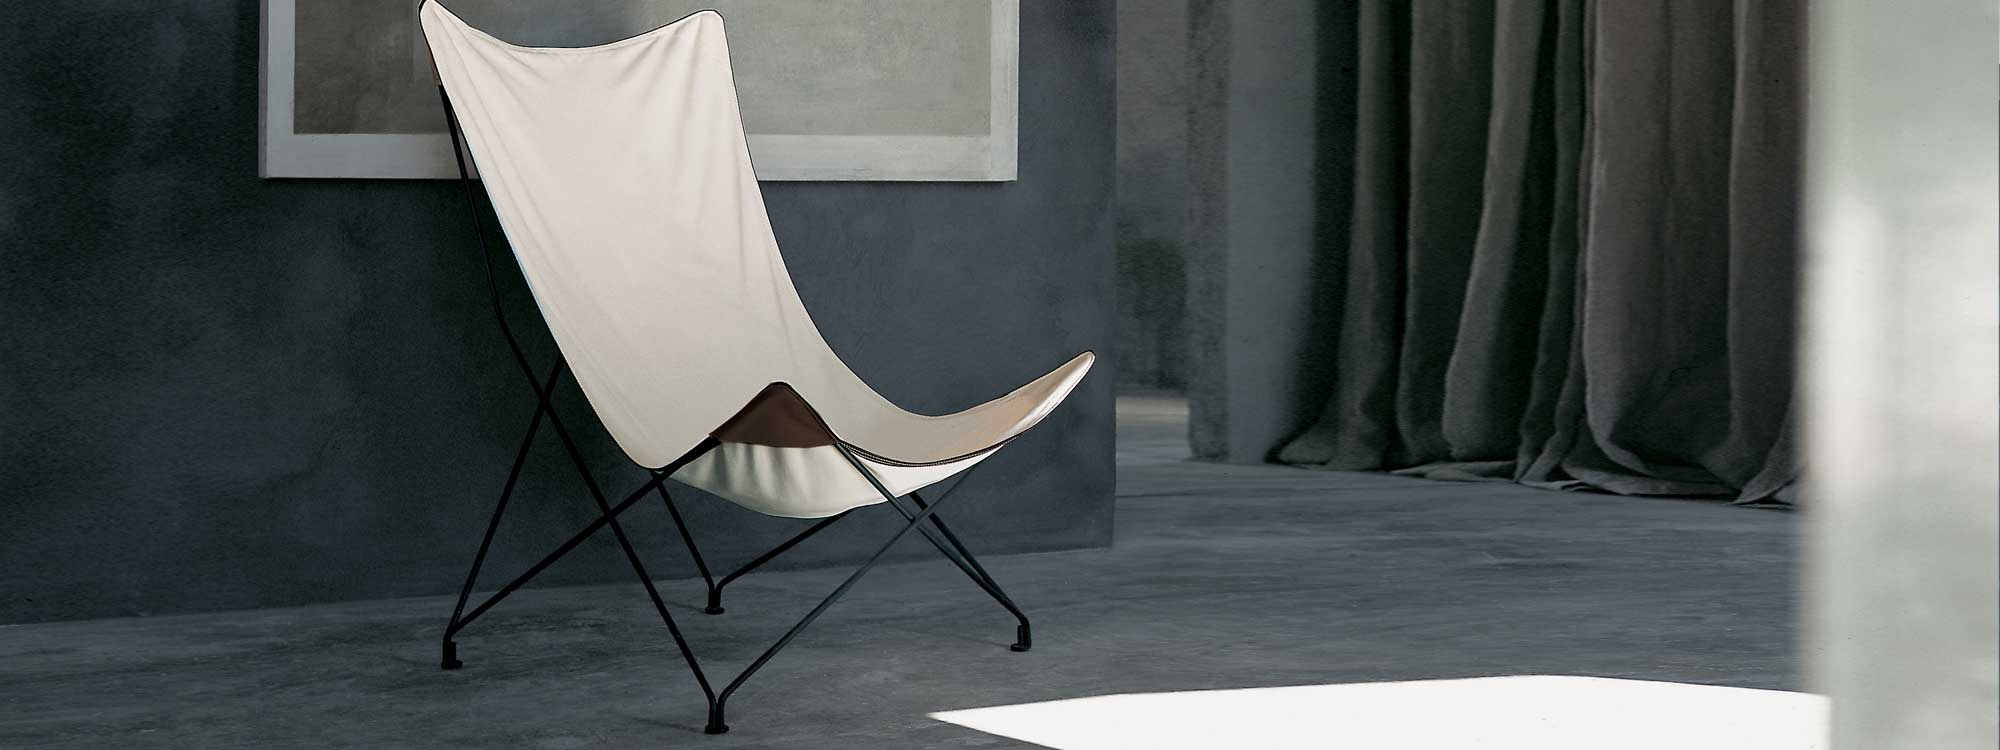 Cream-coloured Lawrence folding butterfly chair can also be used indoors, such as shown here